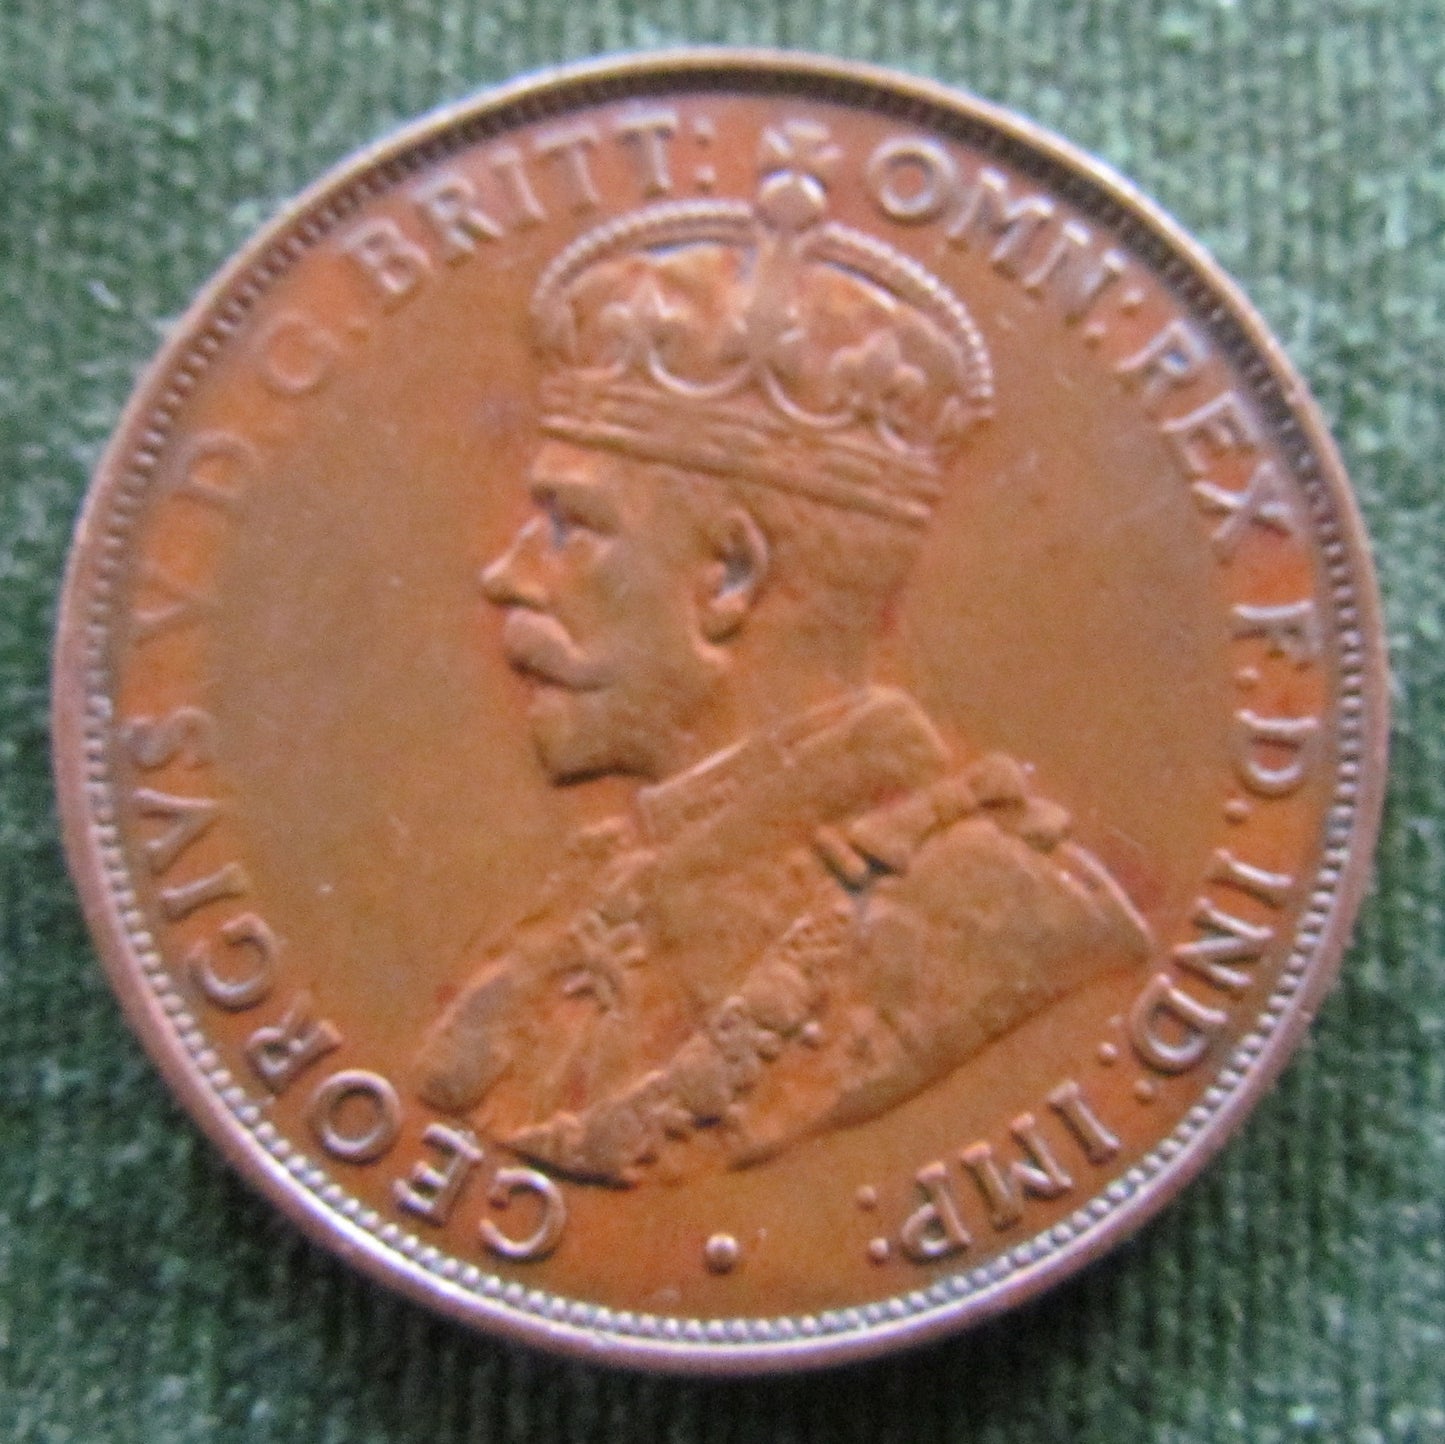 Australian 1936 1d 1 Penny King George V Coin - Variety Letter Fadeout